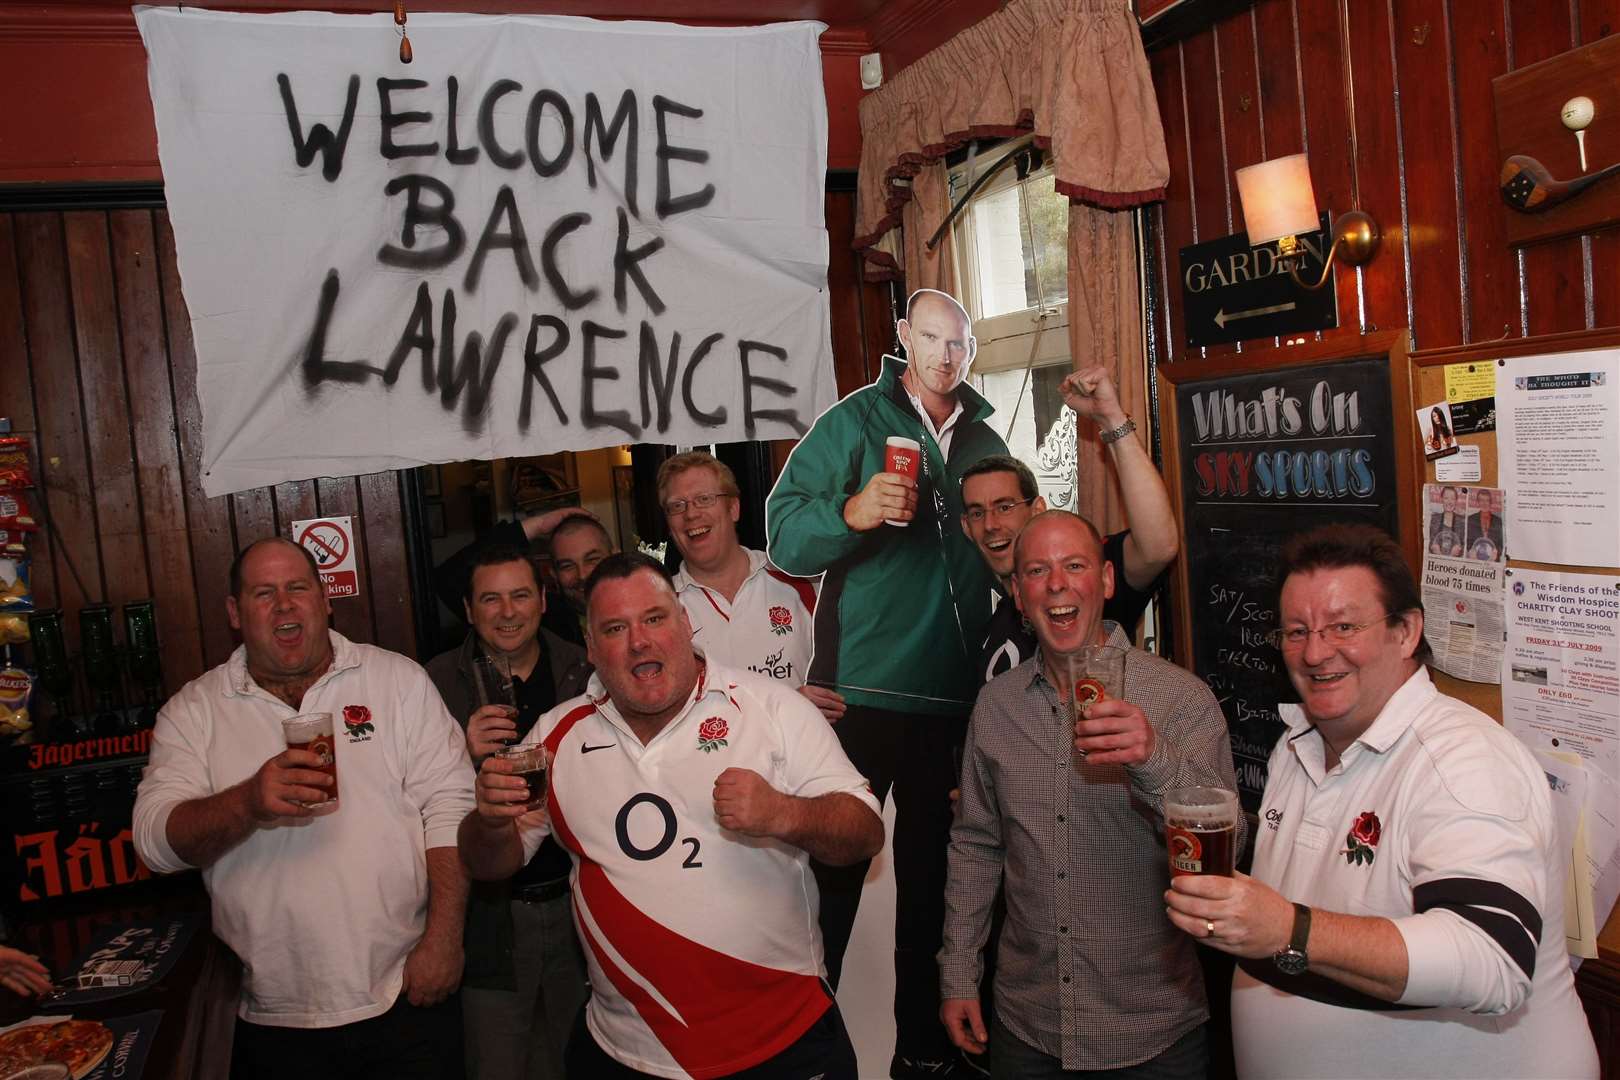 Regulars at the Who'd Ha Thought It in Baker Street, Rochester, celebrate the return of Lawrence Dallaglio to the pub in February 2009. The pub is still going today. Picture: Peter Still